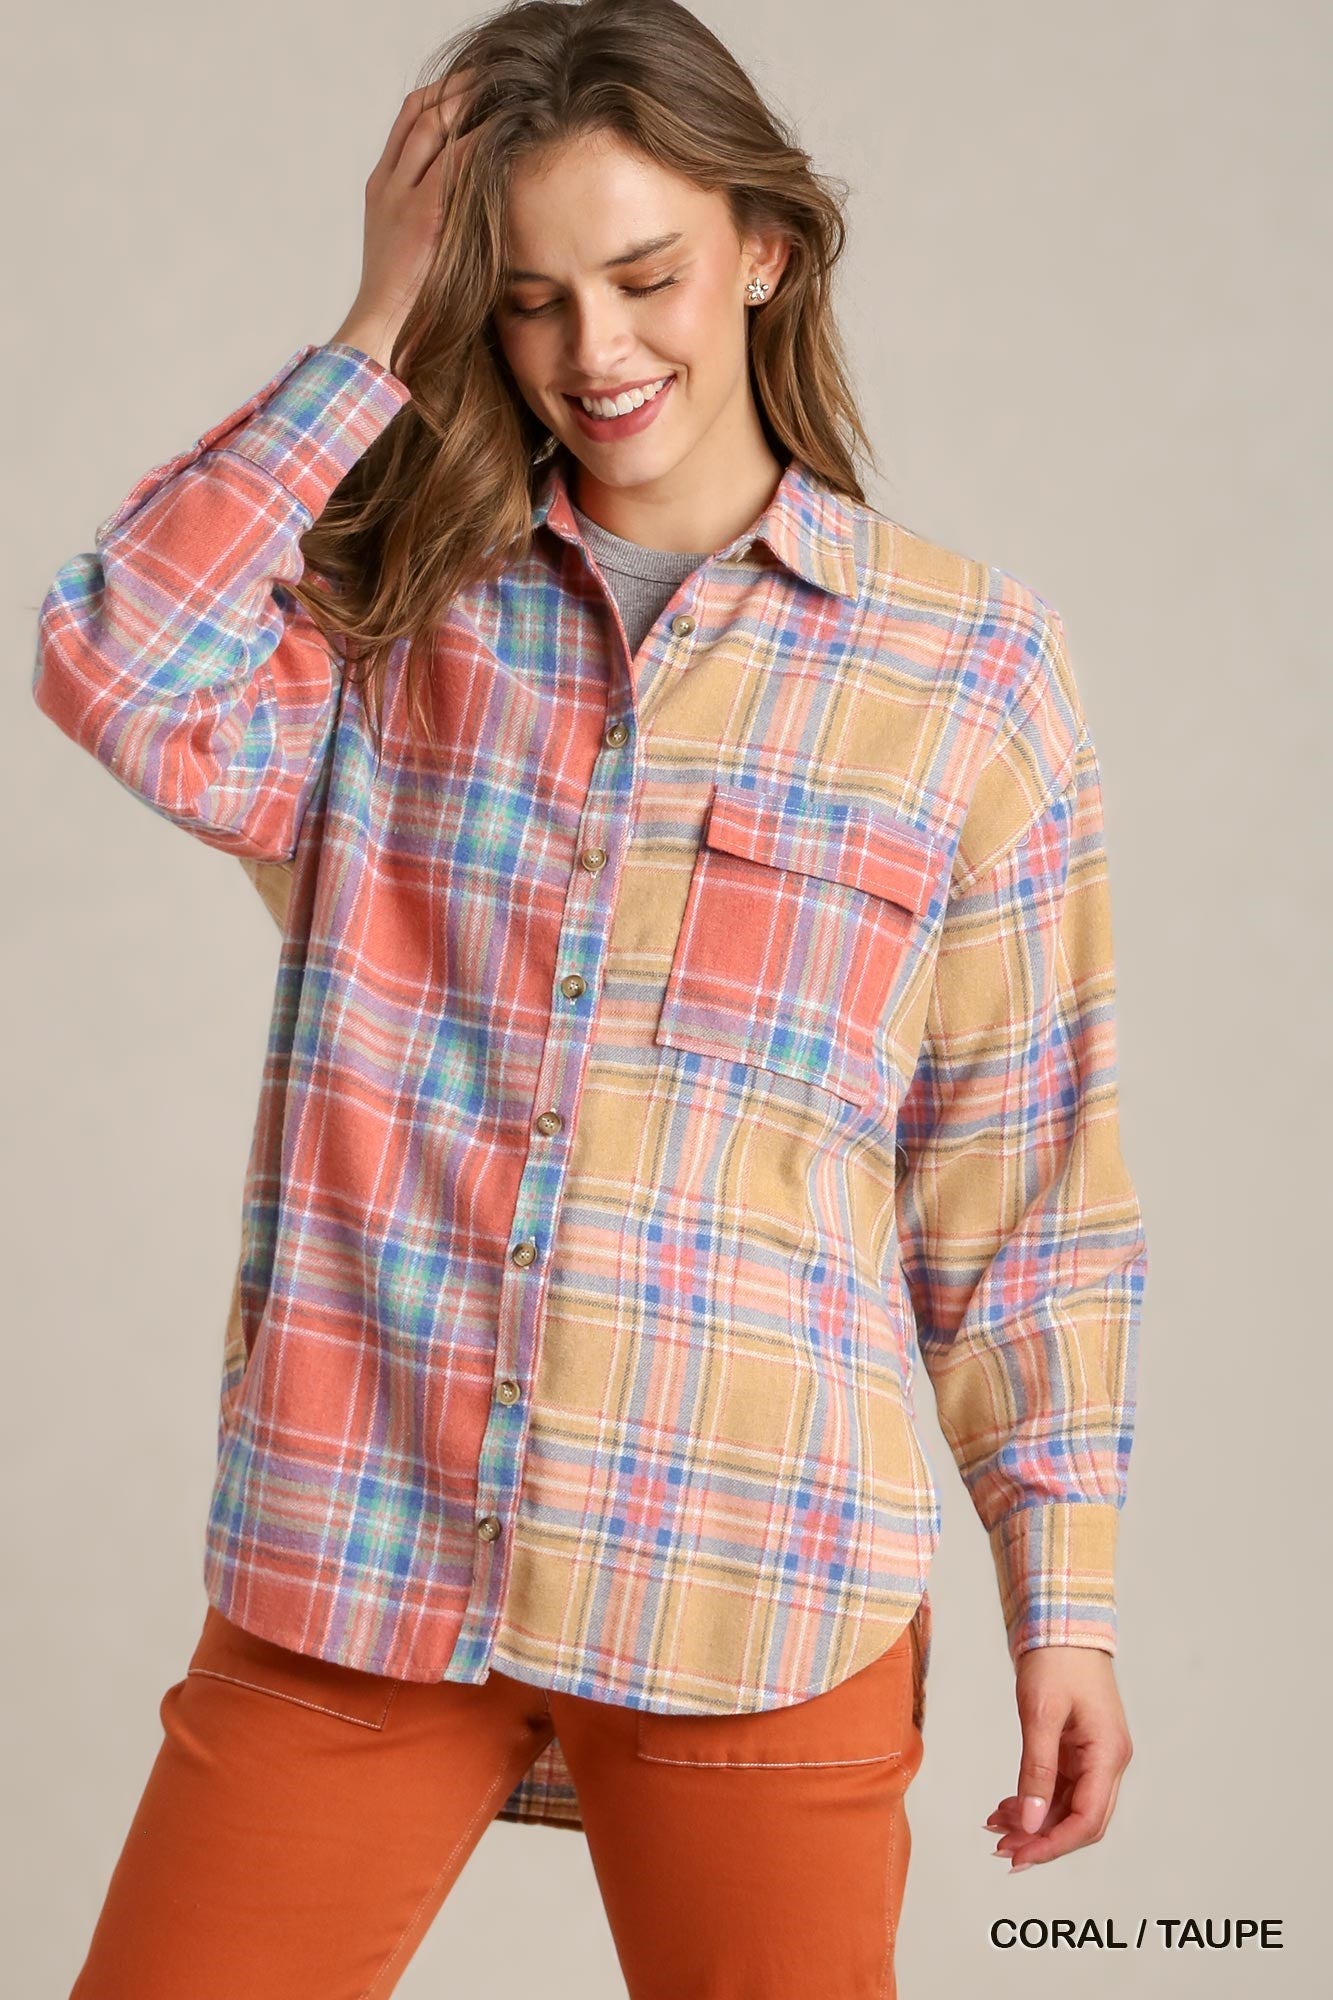 Coral Taupe - Mixed Plaid Boxy Cut Button Down Flannel With Front Pocket - 2 colors - womens shirt at TFC&H Co.